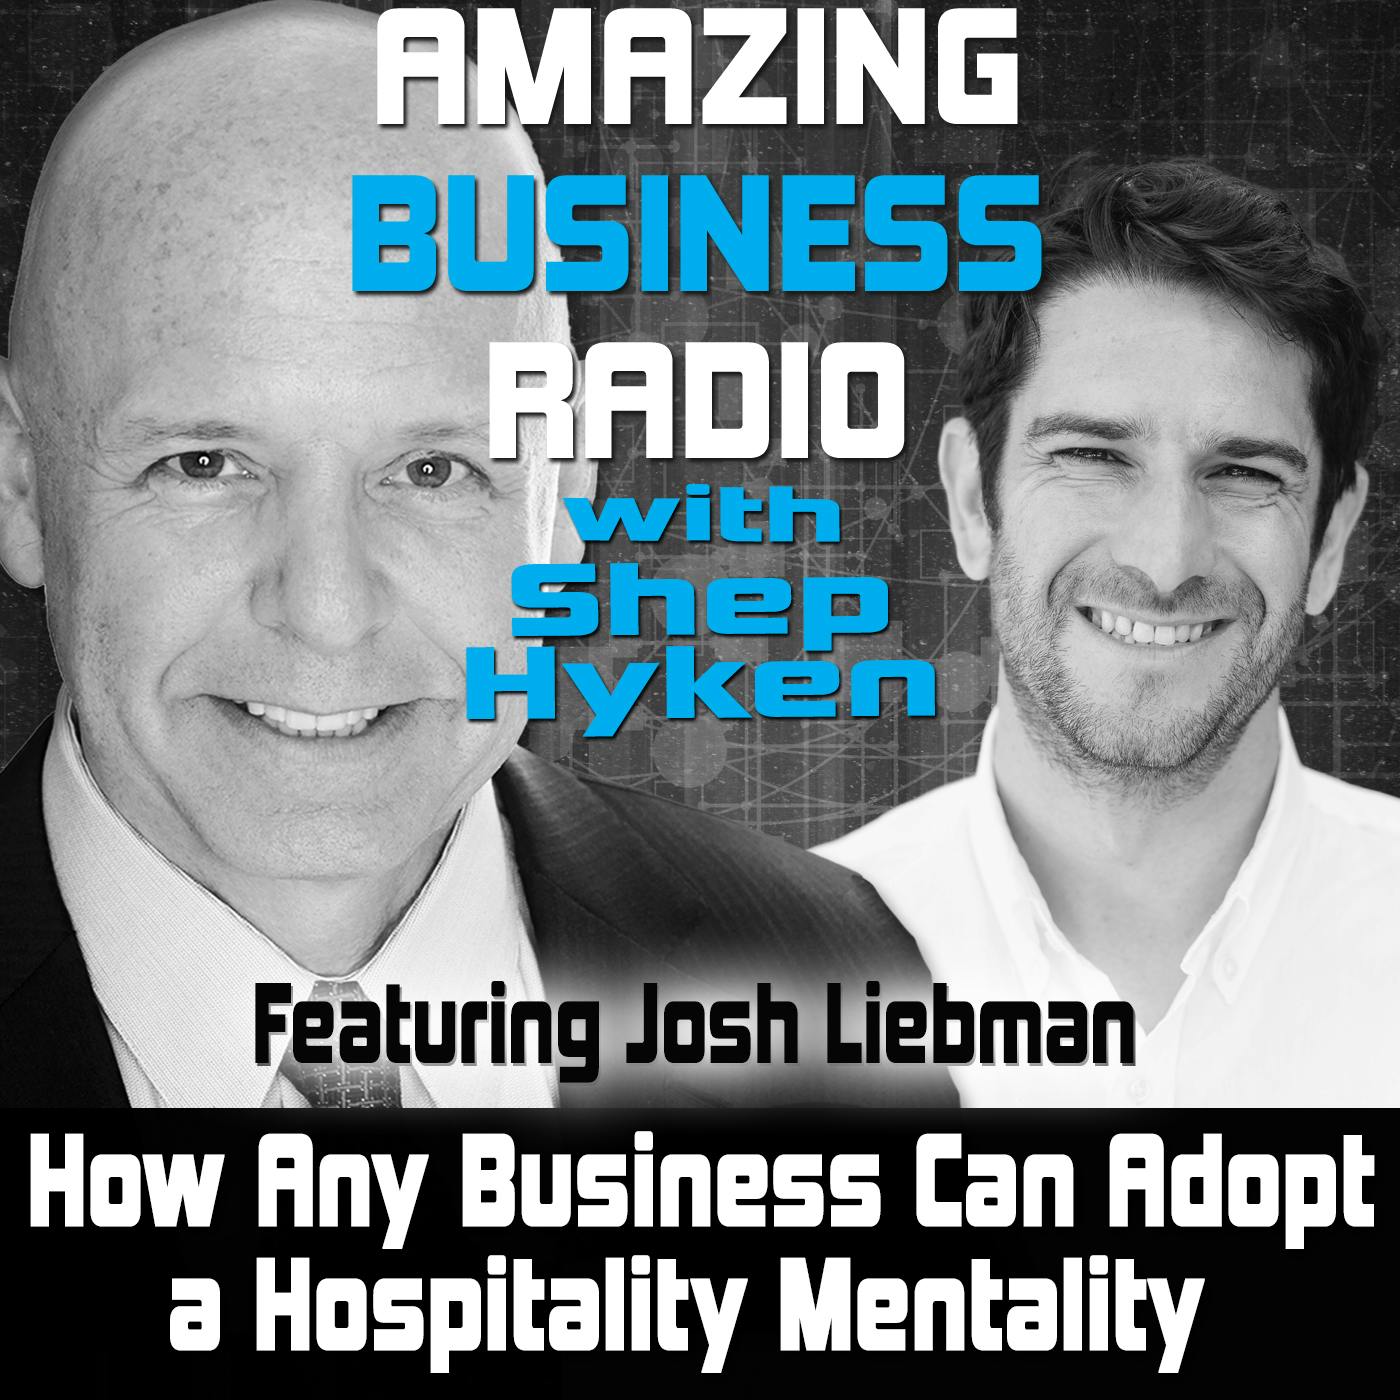 How Any Business Can Adopt a Hospitality Mentality Featuring Josh Liebman